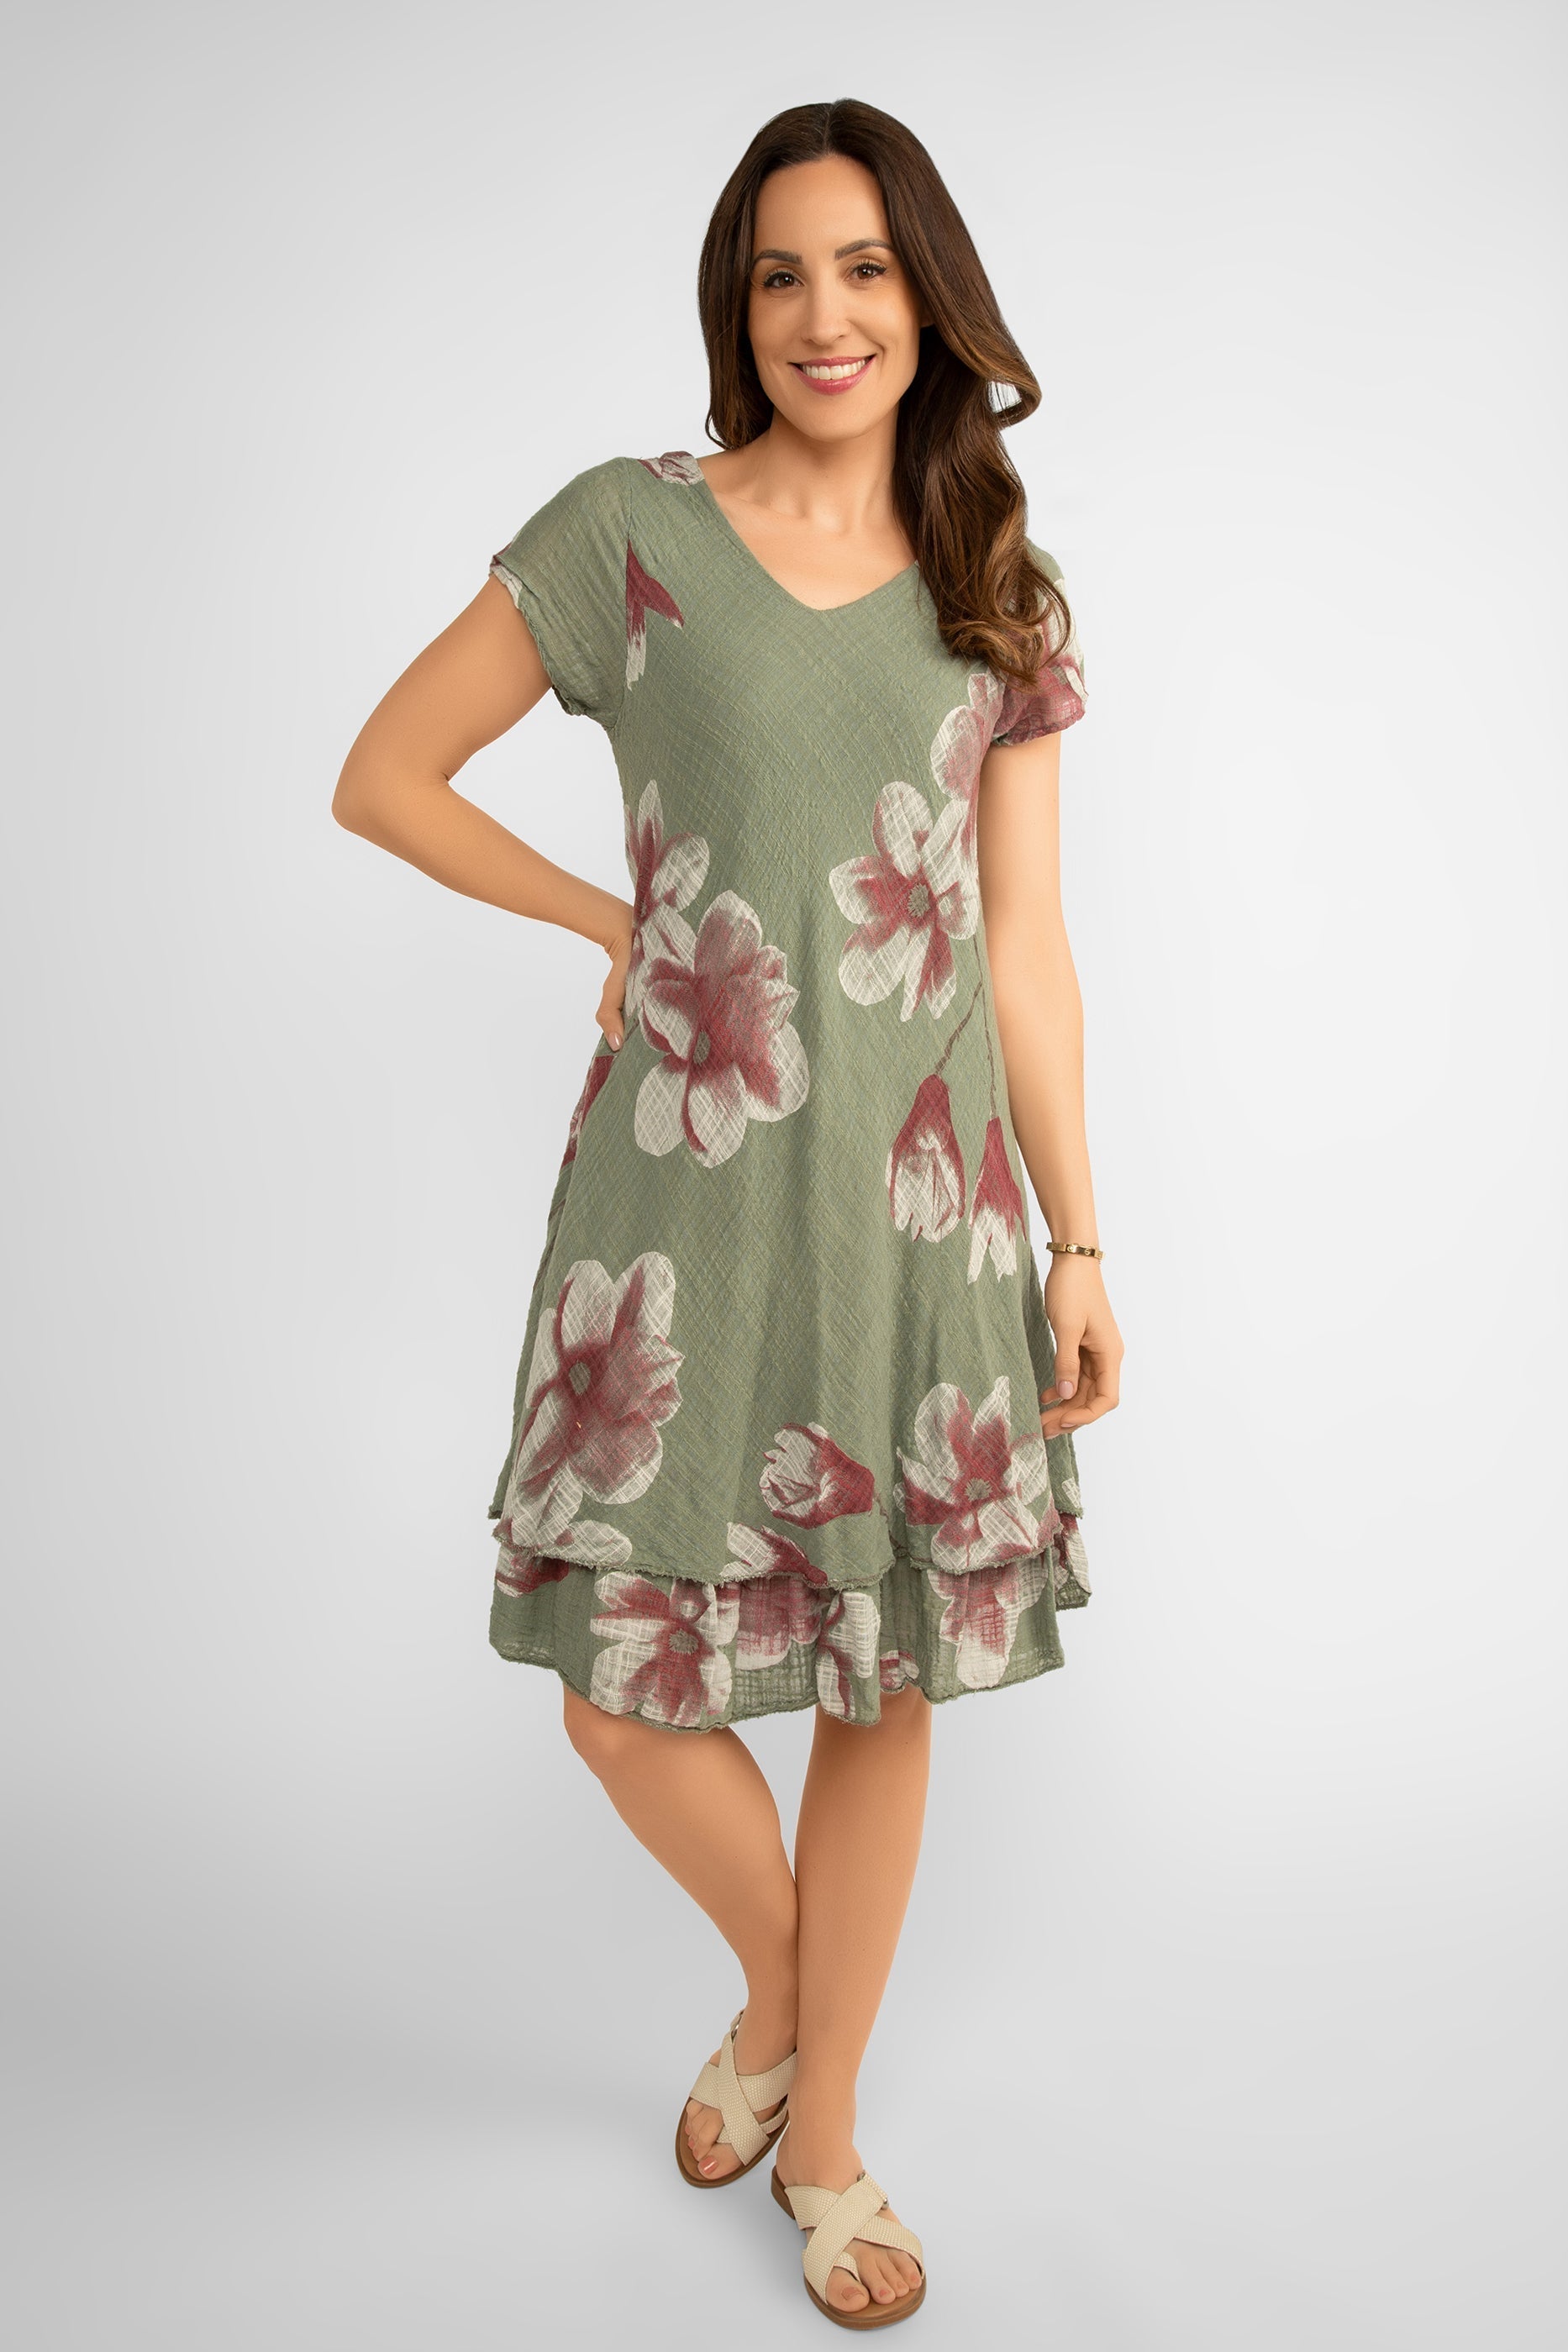 Bella Amore (6859A) Women's Short Sleeve V-Neck Knee Length Cotton Dress with Tiered Skirt in Military Green and Pink Florals